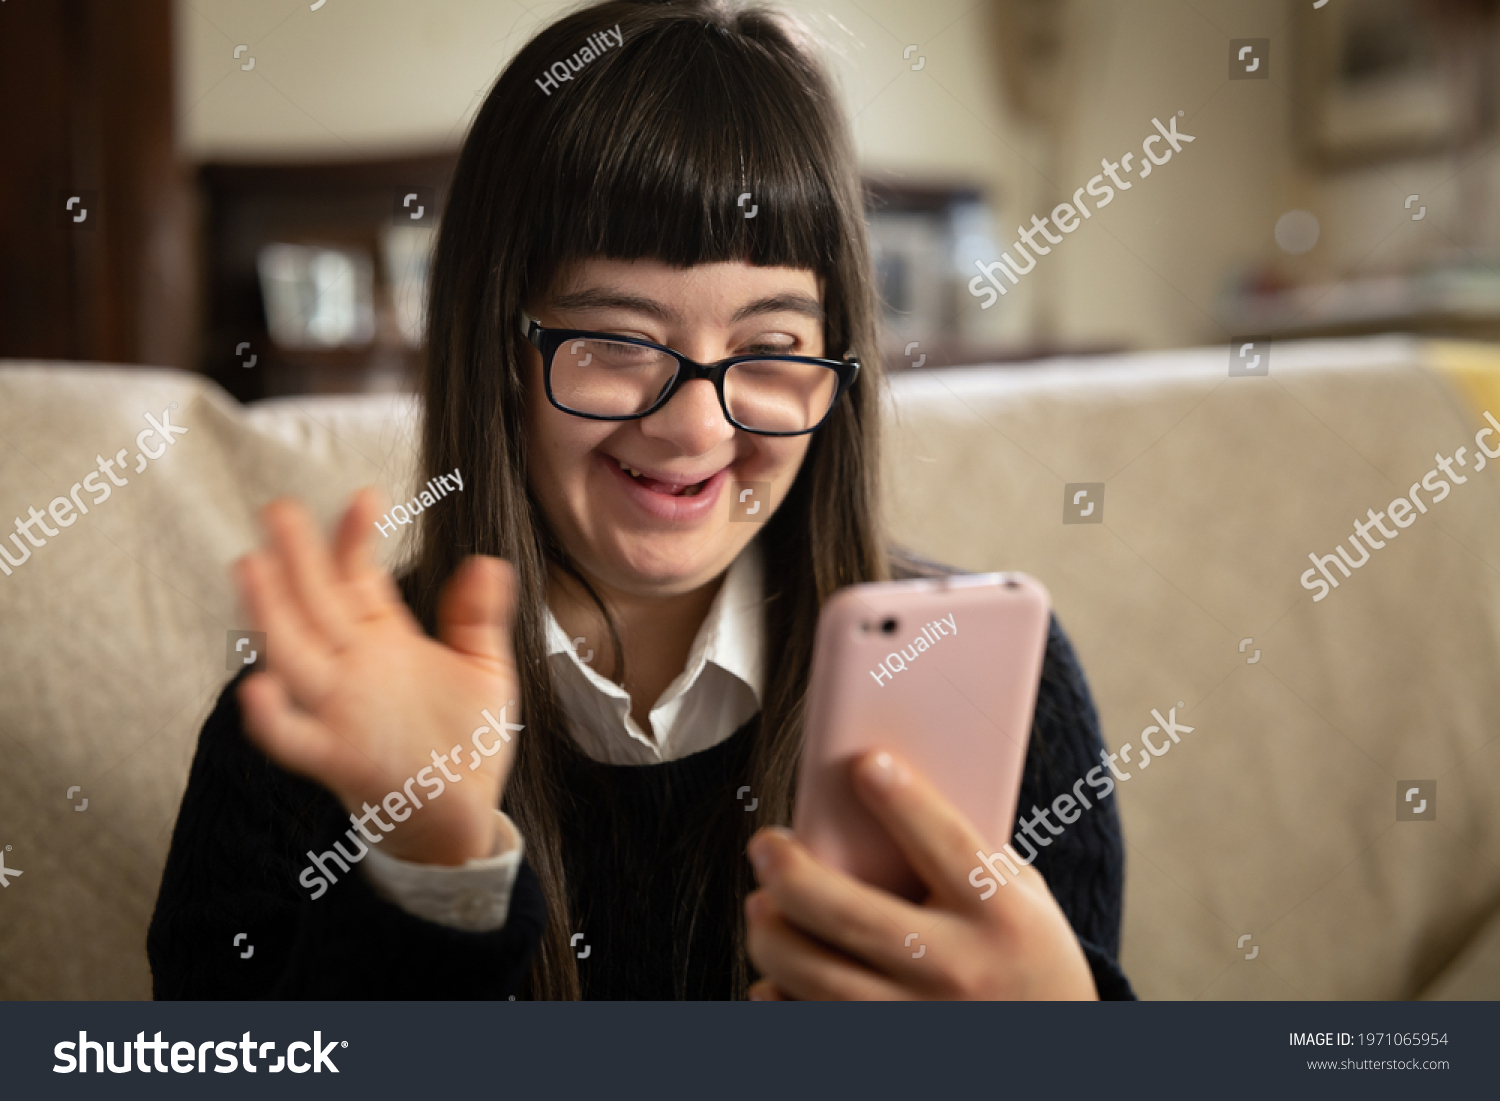 Cinematic shot of happy teen girl with down syndrome making video call with smartphone to friends or family at home. Concept of technology, disability, media, friendship, new generation. #1971065954